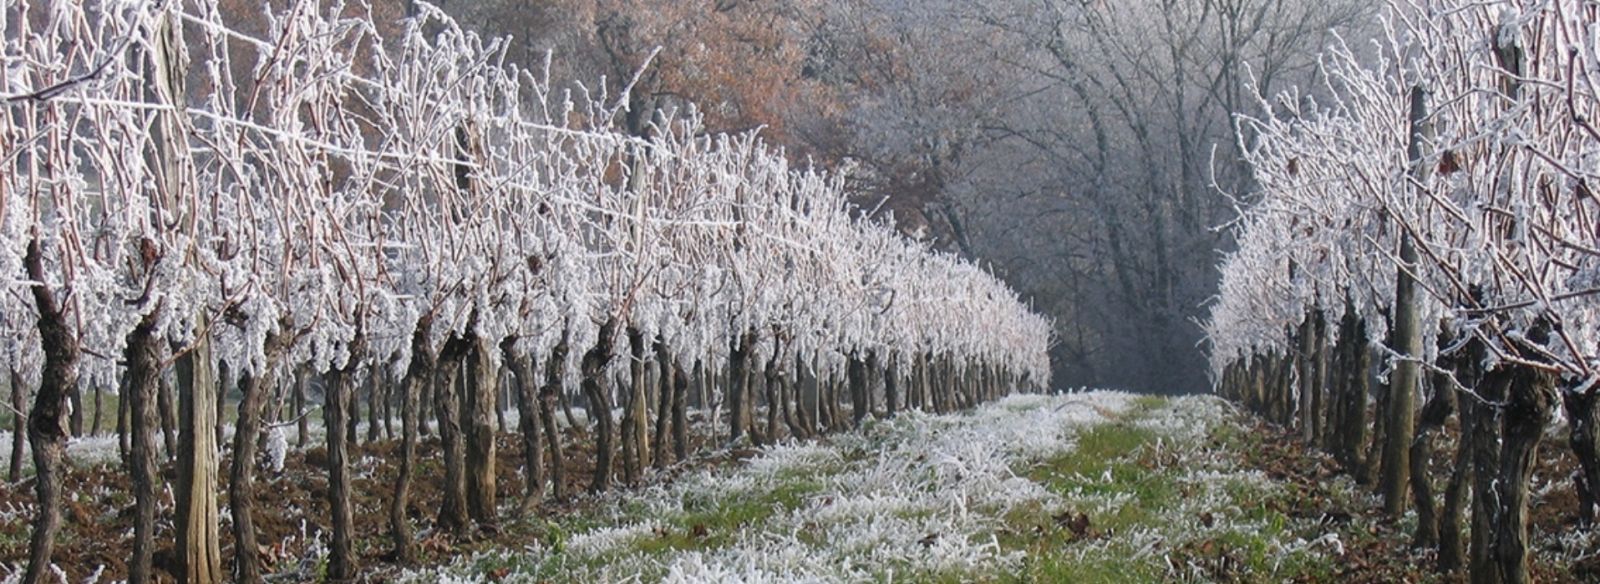 italy-orchard-damaged-by-frost-march-27-2020